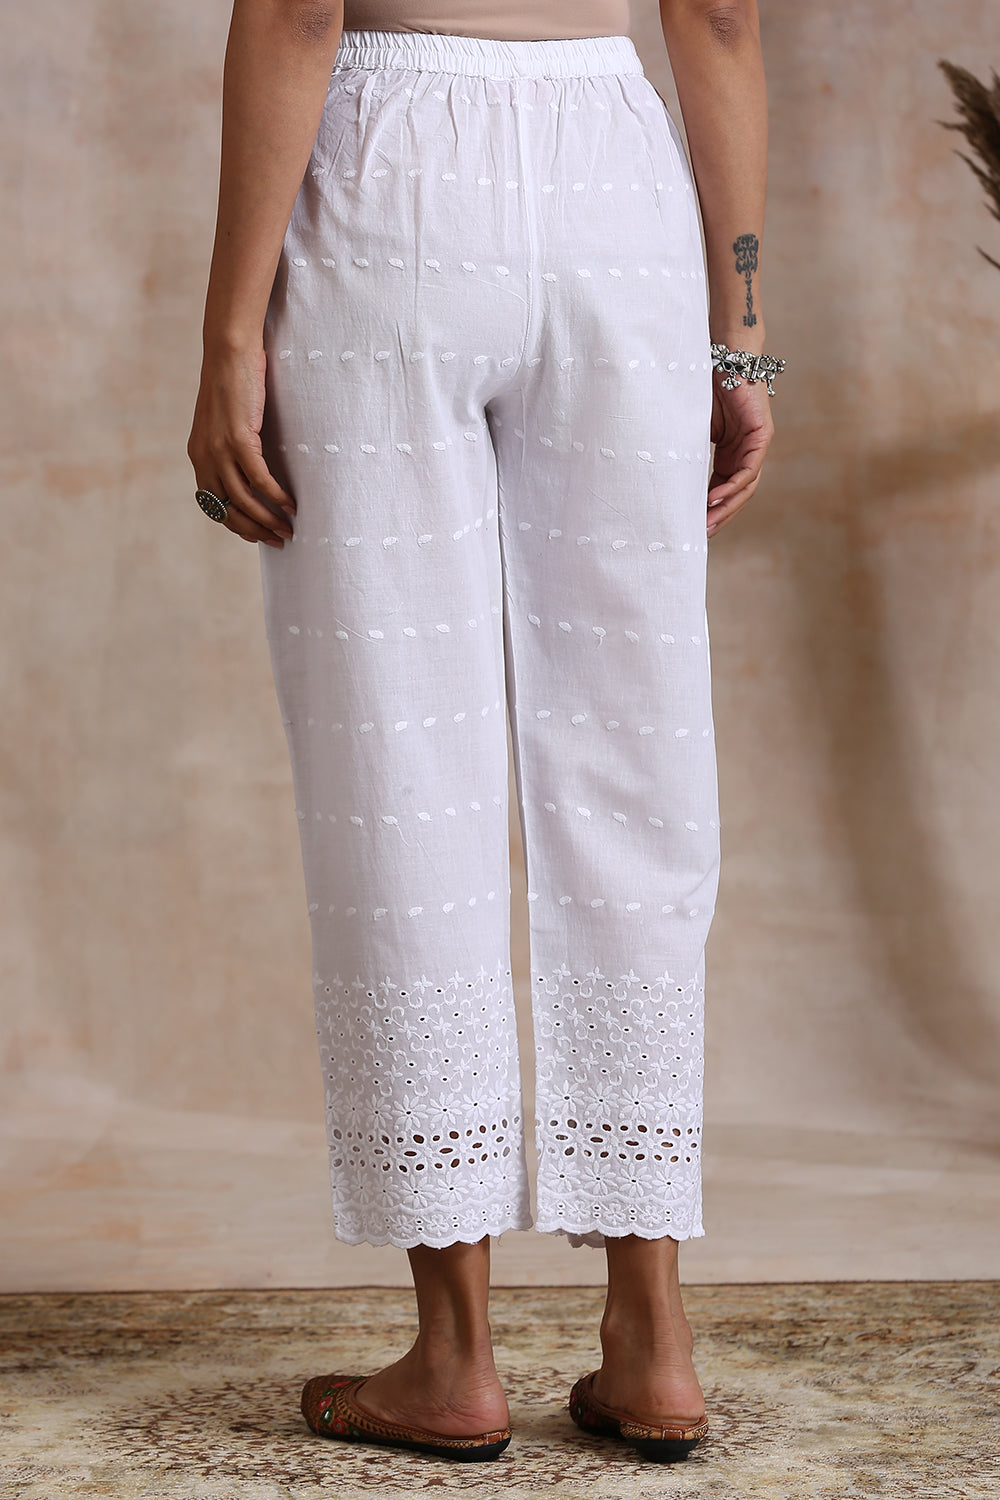  Rudrah Women Embroidered Bottom Pants Chicken Palazzo